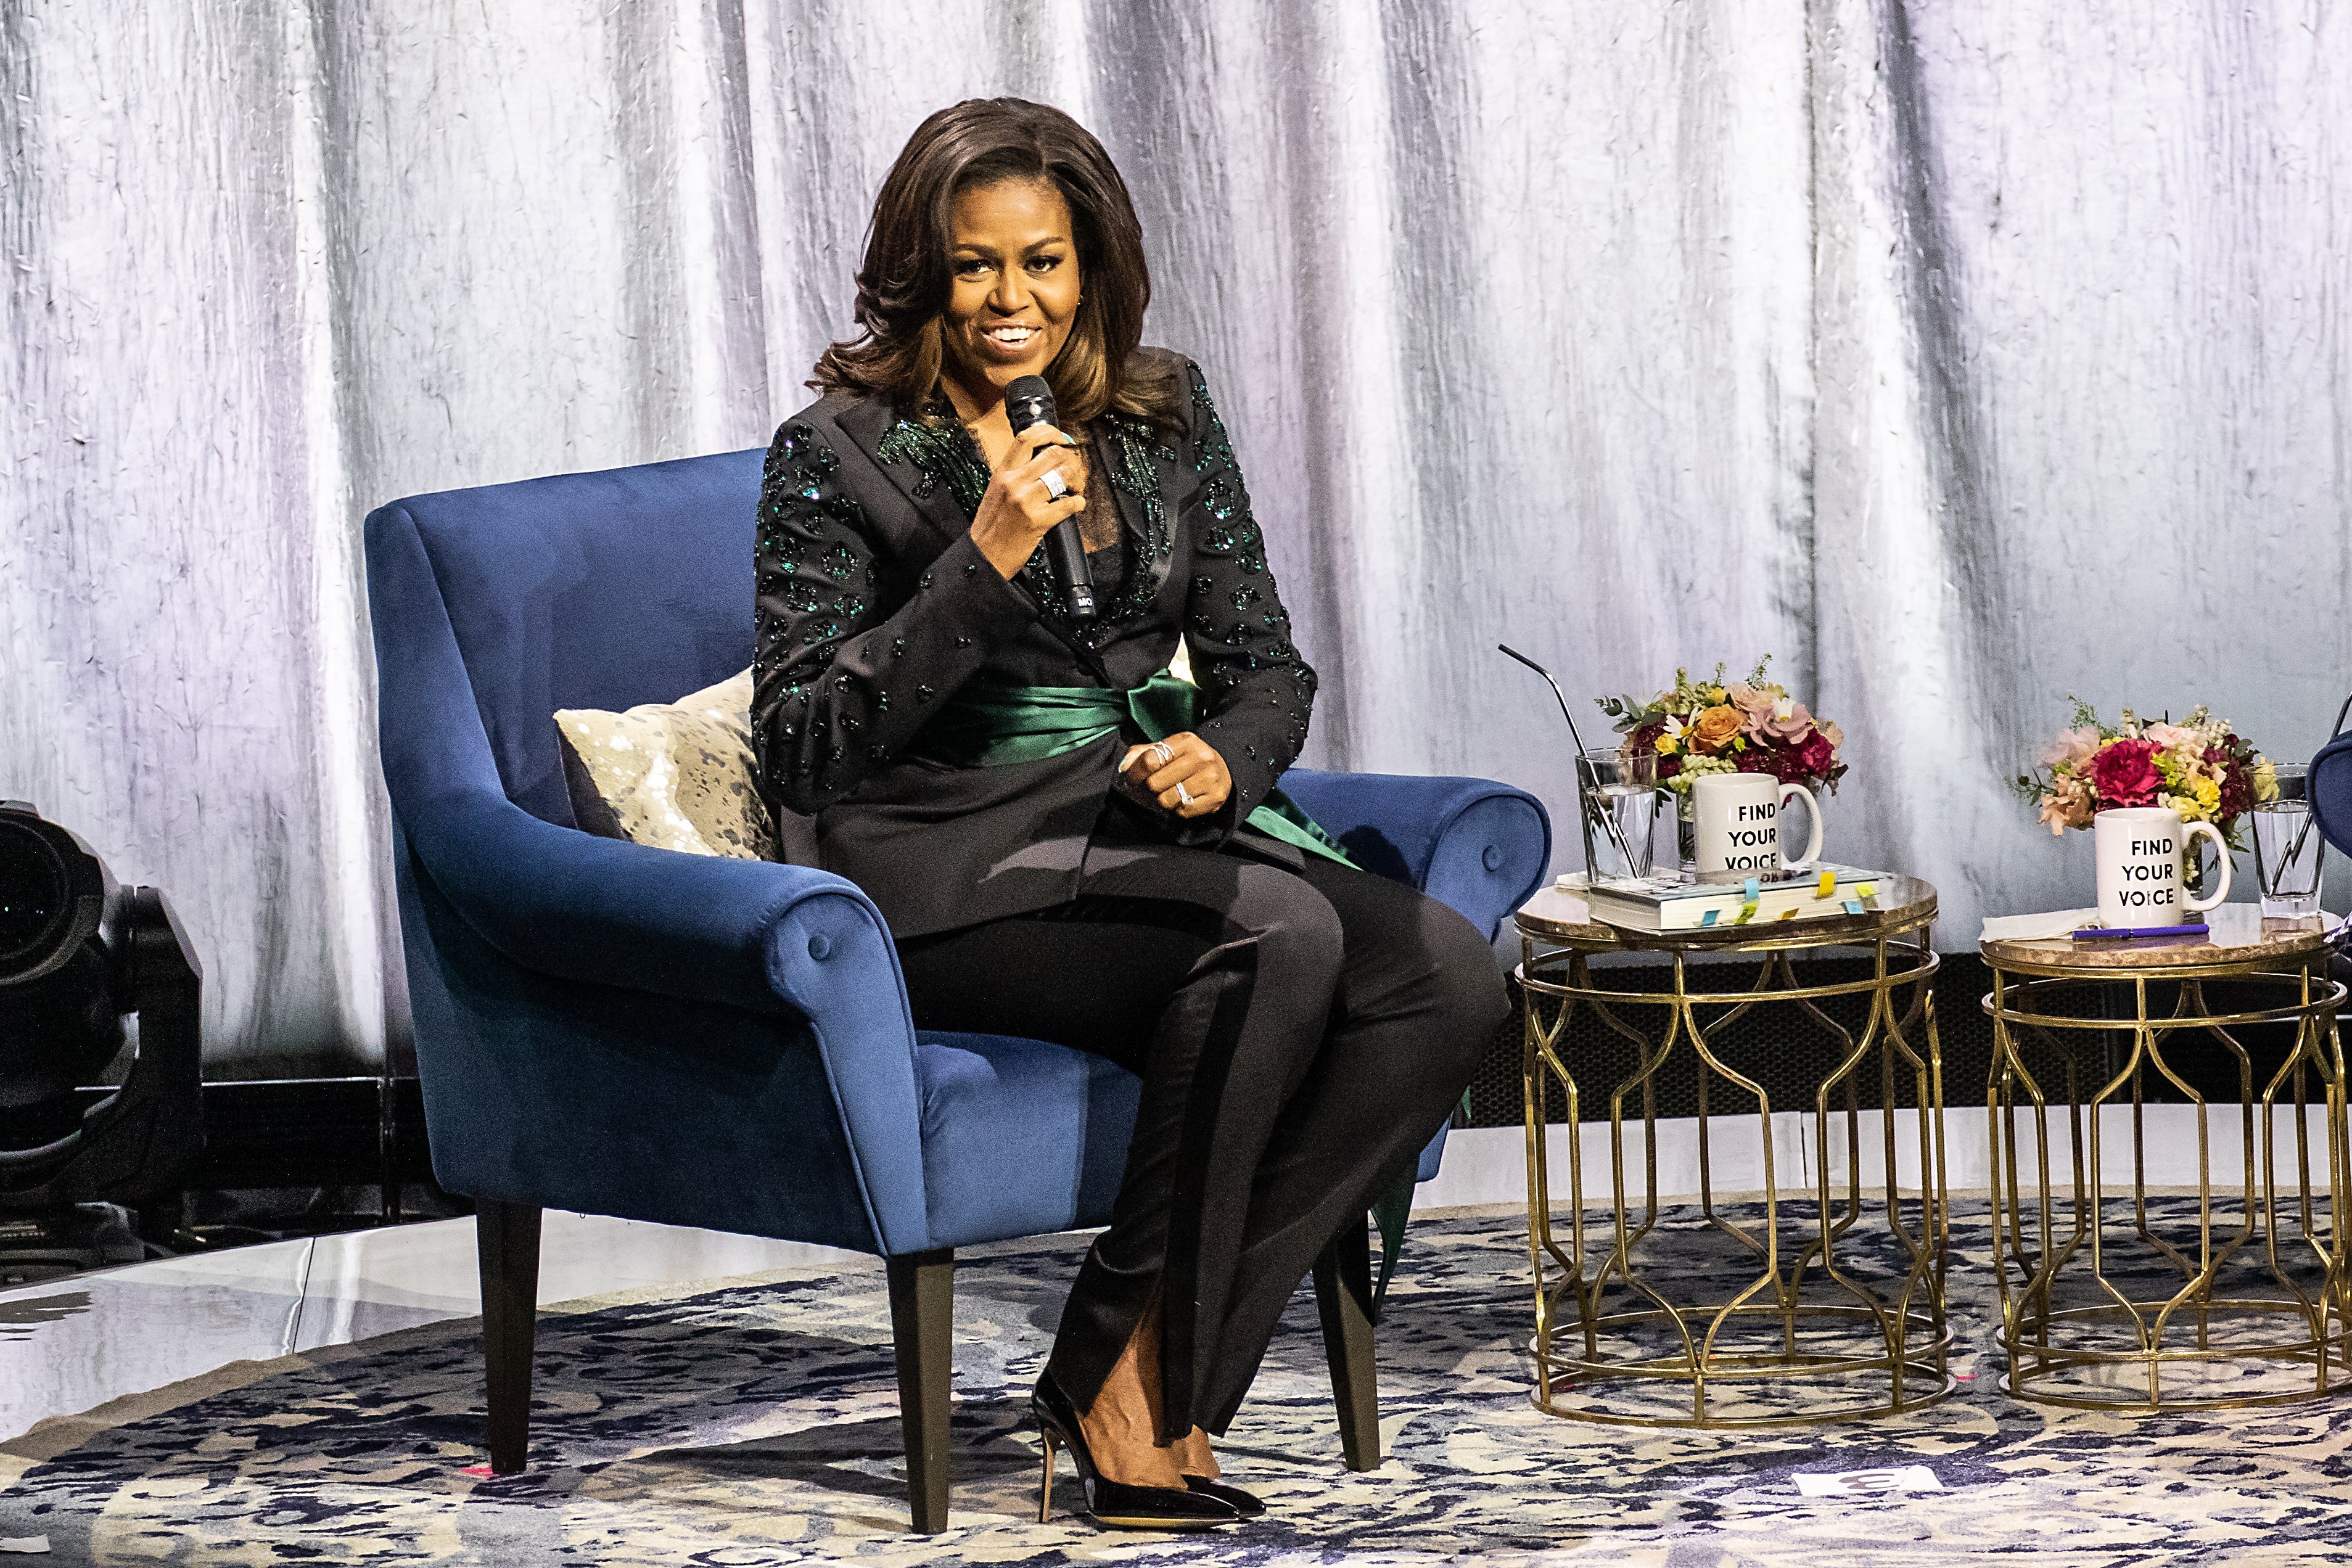 Michelle Obama at the Oslo Spektrum on April 11, 2019 in Oslo, Norway. | Photo: Getty Images